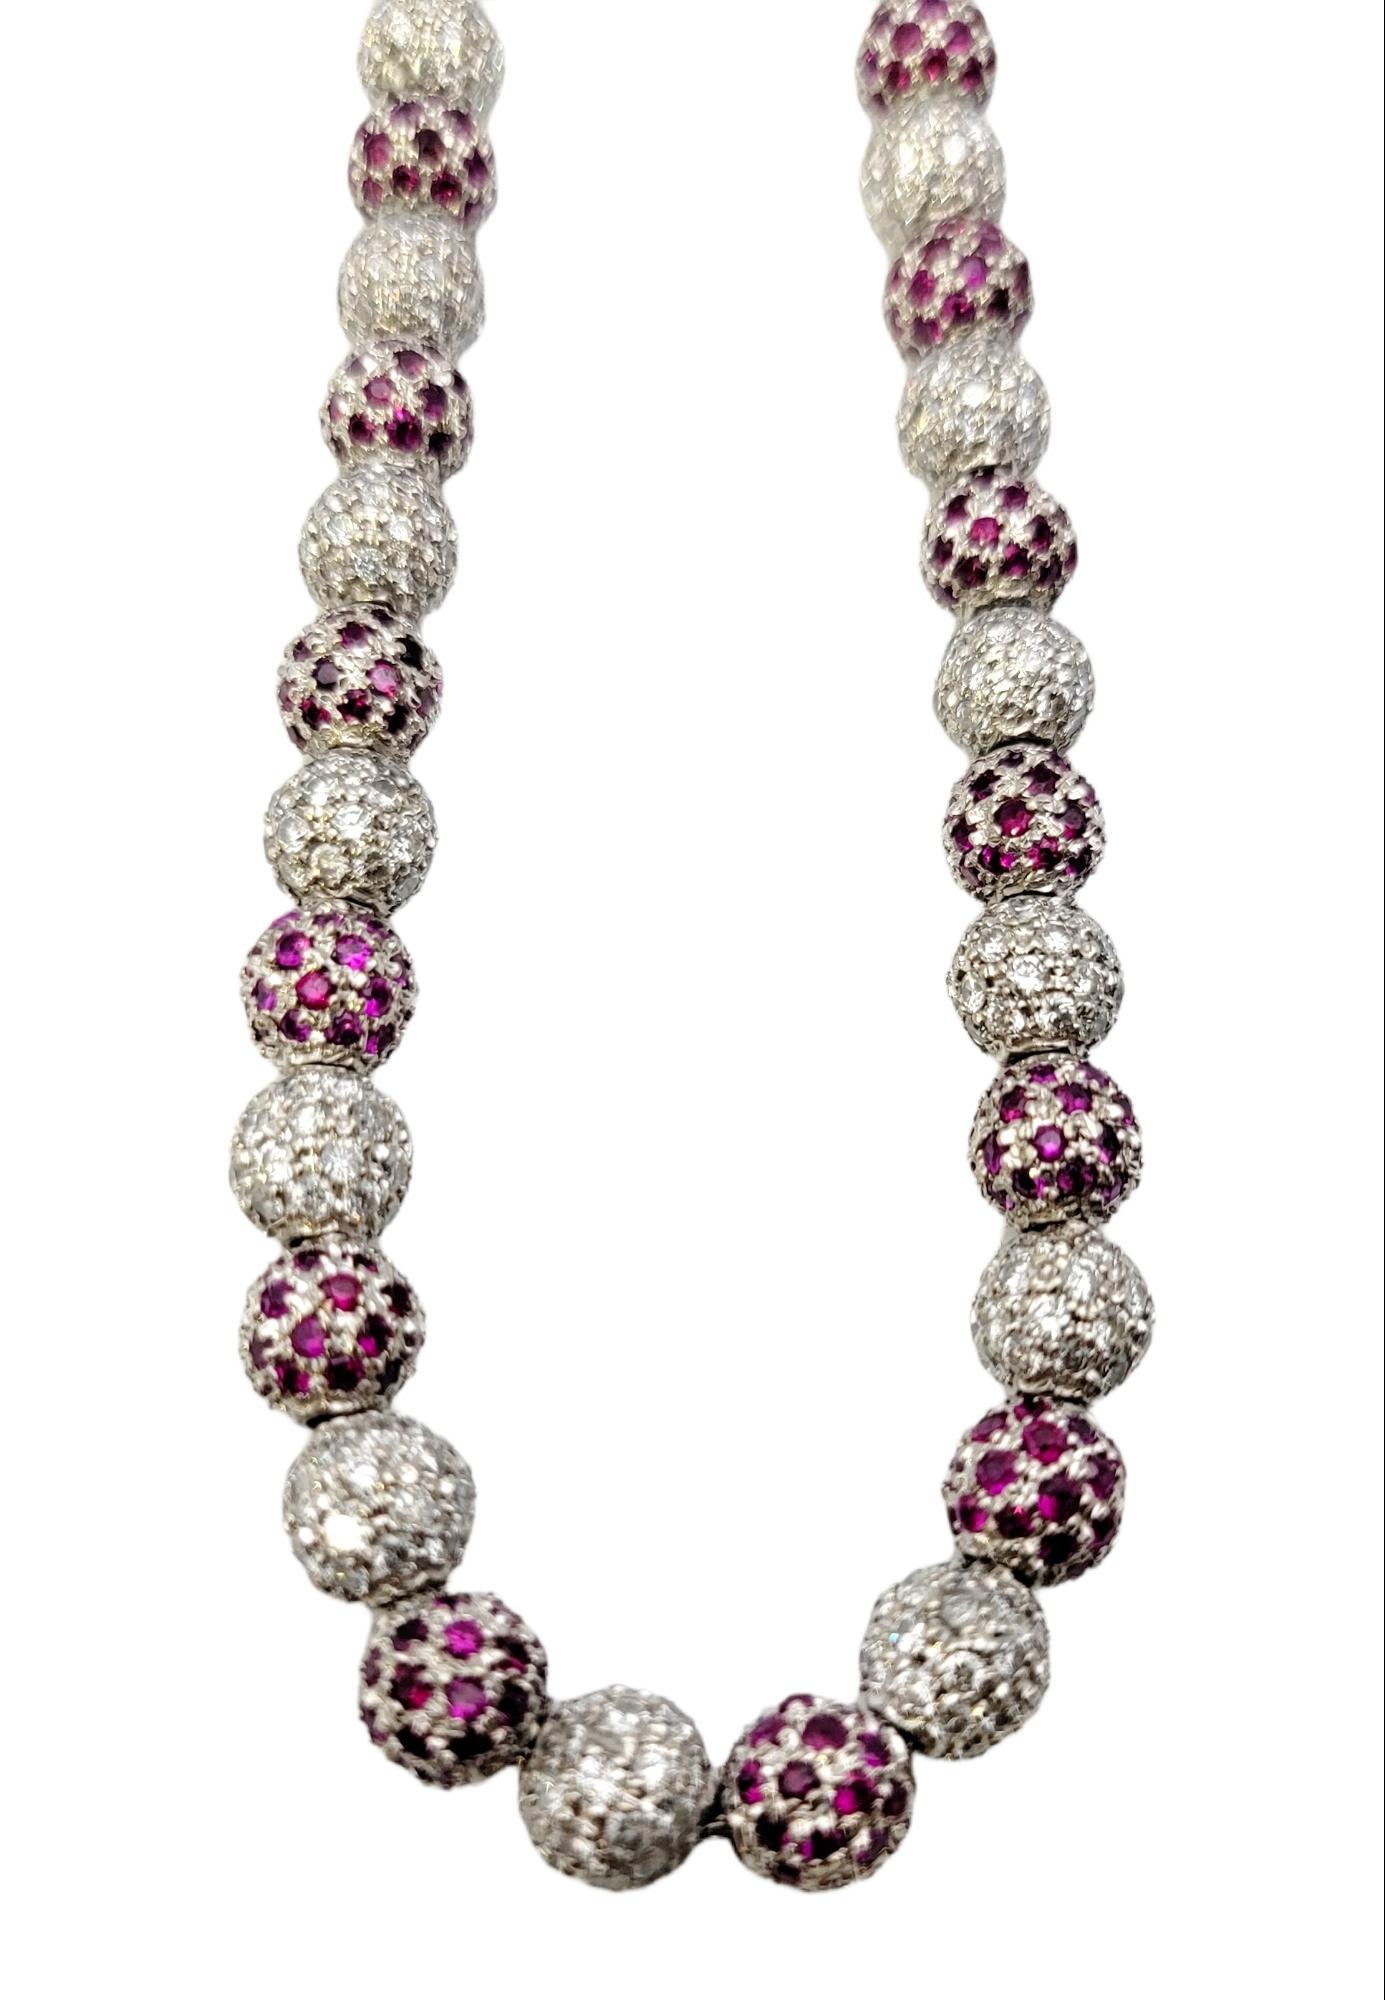 This stunningly sparkly diamond and ruby beaded necklace is an absolute showstopper. The contrasting white and red stones fill the piece and absolutely light up the neck! Featuring 608 natural white diamonds and an additional 608 lab created rubies,